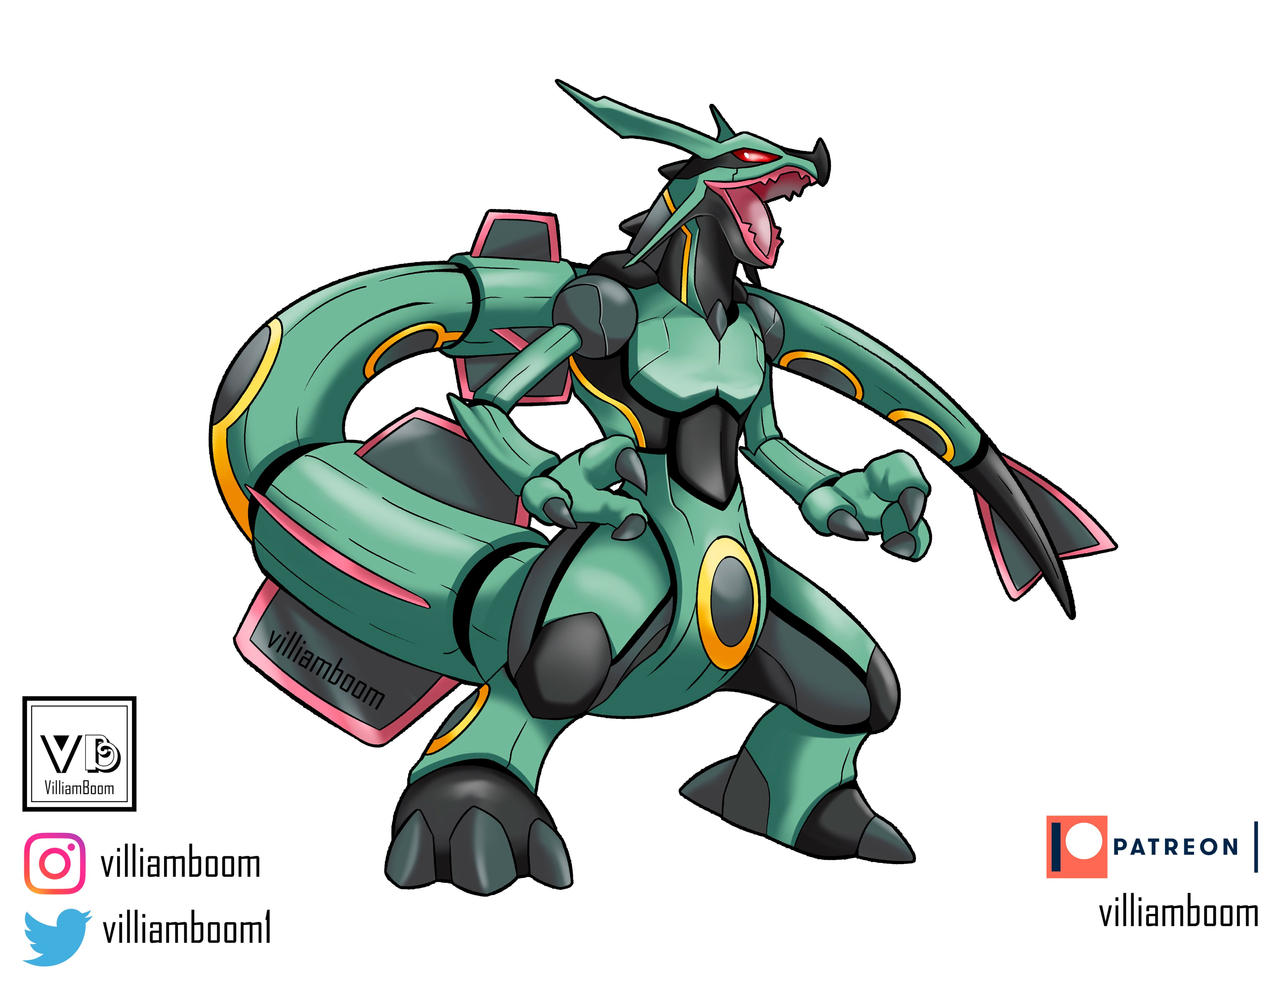 Luxkrom (Luxray-Zekrom fusion) by jordanqv.deviantart.com on